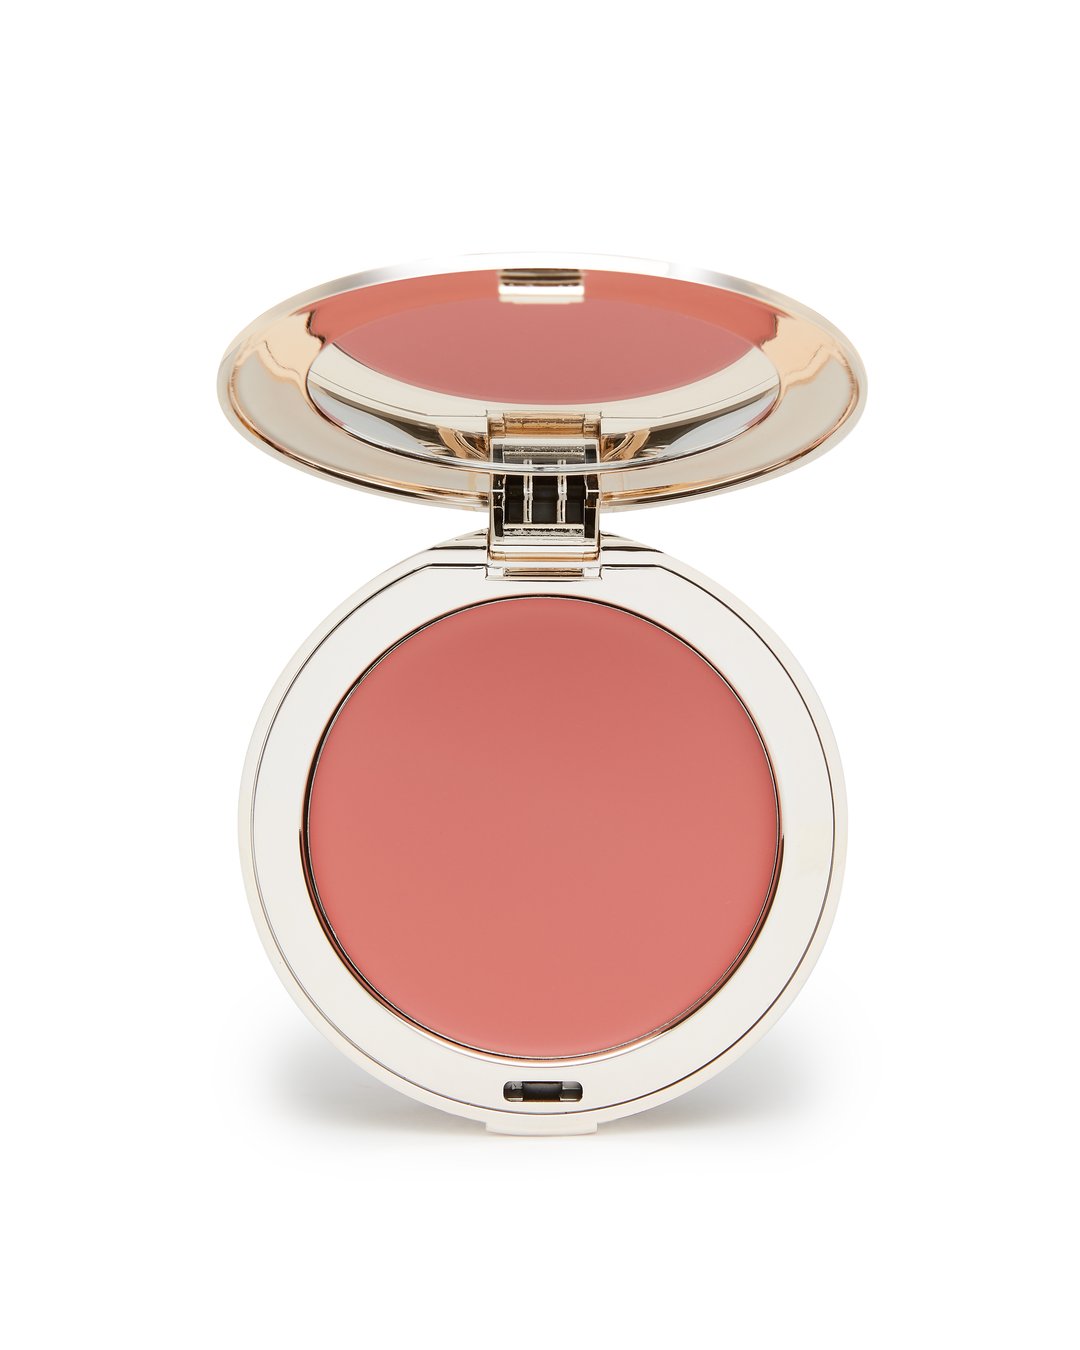 Sculpted Cream Luxe Blush Pink Supreme

